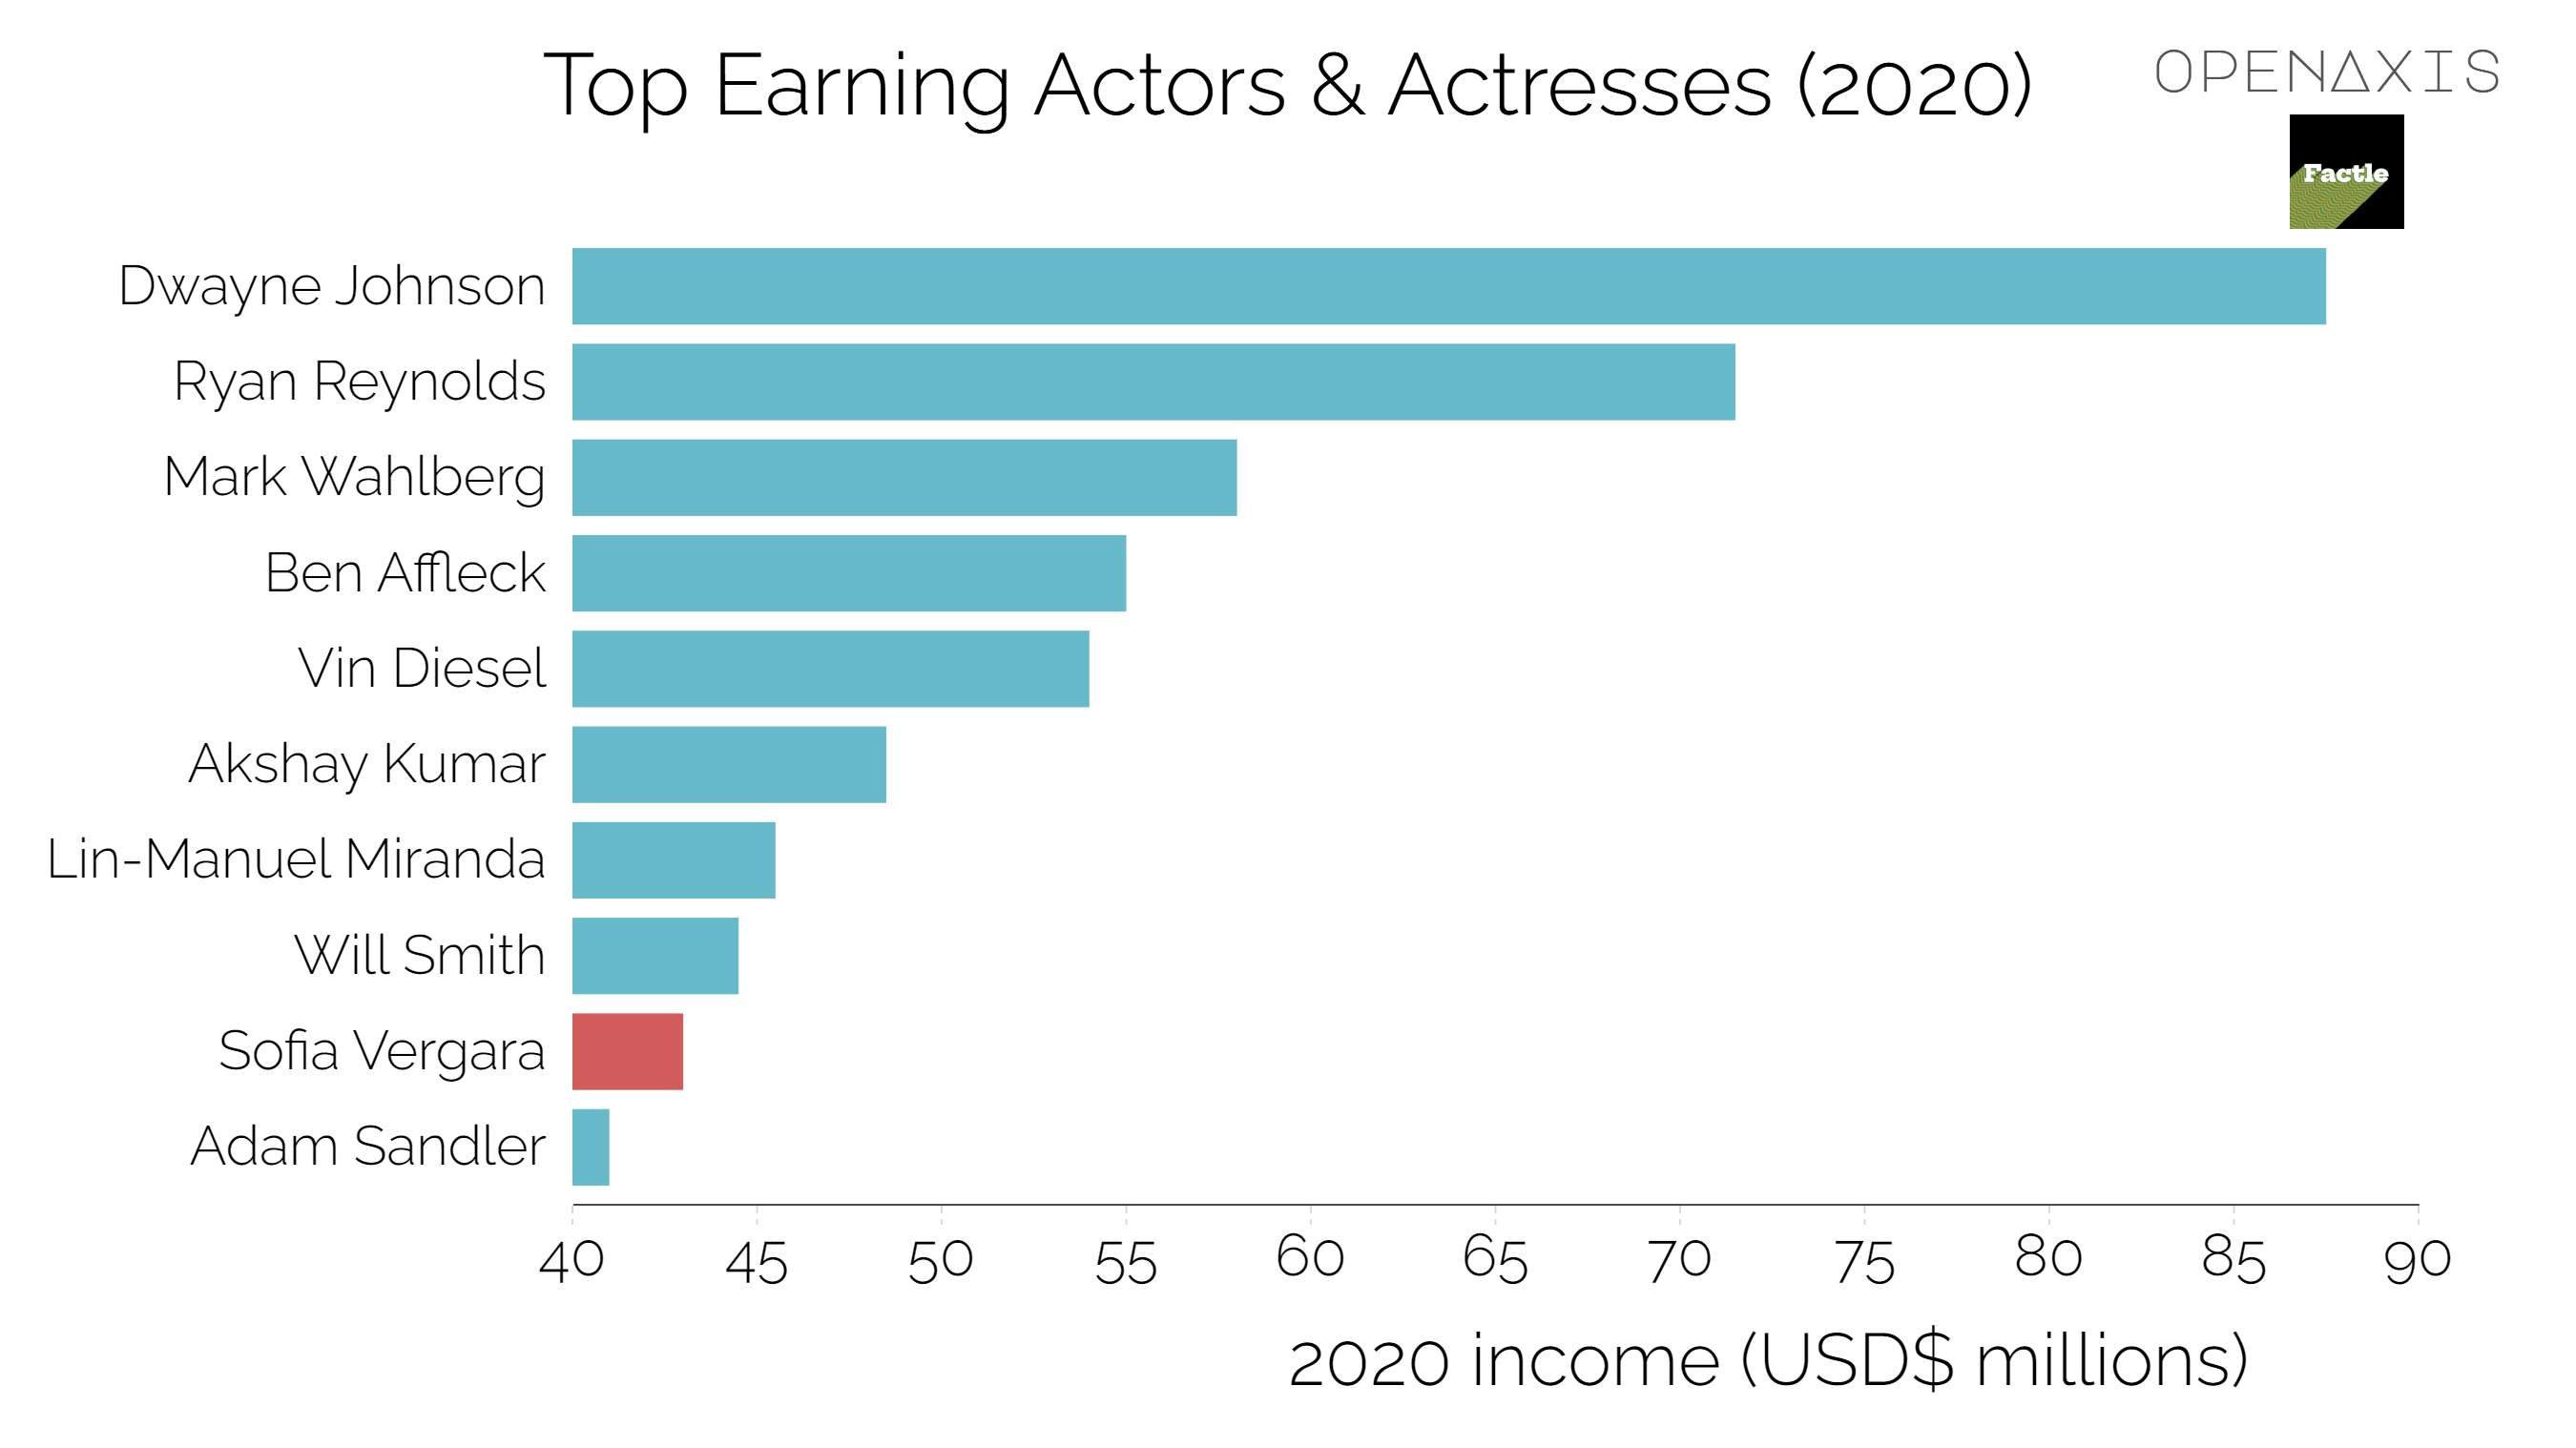 <p>Dwayne Johnson led the list of best paid actors worldwide in 2020. He earned 87.5 million U.S. dollars thanks to Netflix's action comedy movie "Red Notice", amongst others. Ryan Reynolds ranked second with an income of 71.5 million U.S. dollars. The list also includes Bollywood actor Akshay Kumar, who had an income of 48.5 million U.S. dollars.</p><p><br /></p><p>The best-paid actress worldwide was Sofia Vergara in 2020, with an annual income of 43 million U.S. dollars. Angelina Jolie came second. She earned roughly 35.5 million U.S. dollars with for example her leading role in "The Eternals".</p><p><br /></p><p><span data-index="0" data-denotation-char data-id="0" data-value="&lt;a href=&quot;/search?q=%23film&quot; target=_self&gt;#film" data-link="/search?q=%23film">﻿<span contenteditable="false"><span></span><a href="/search?q=%23film" target="_self">#film</a></span>﻿</span> <span data-index="0" data-denotation-char data-id="0" data-value="&lt;a href=&quot;/search?q=%23income&quot; target=_self&gt;#income" data-link="/search?q=%23income">﻿<span contenteditable="false"><span></span><a href="/search?q=%23income" target="_self">#income</a></span>﻿</span></p><p><br /></p><p>Source: <a href="/data/3753" target="_blank">Forbes</a></p><p><br /></p>